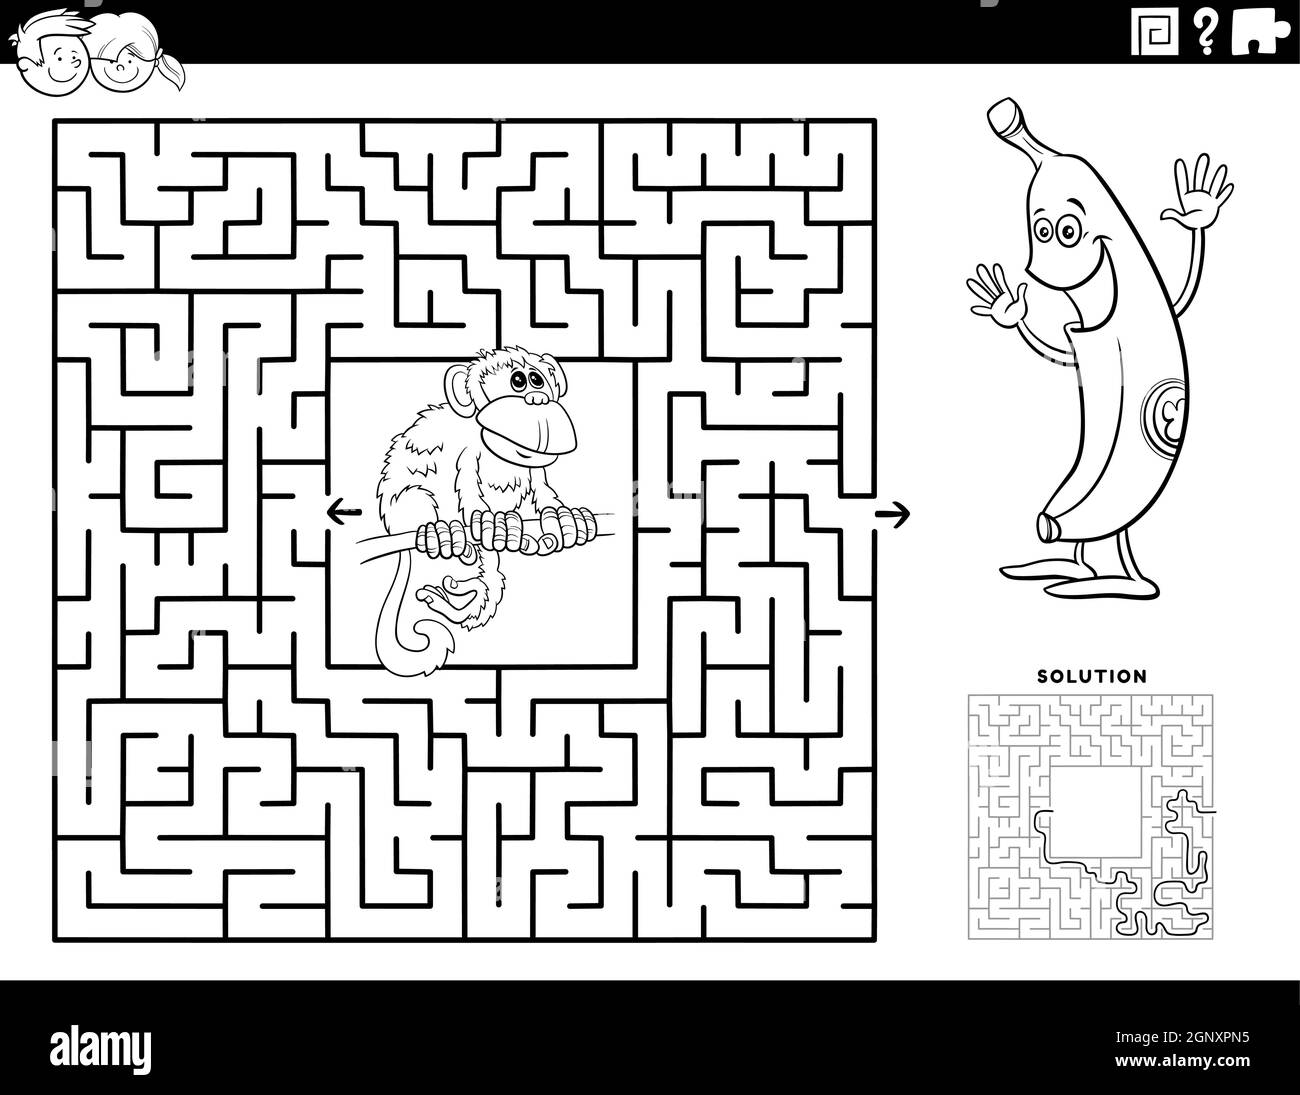 https://c8.alamy.com/comp/2GNXPN5/maze-game-with-monkey-and-banana-coloring-book-page-2GNXPN5.jpg